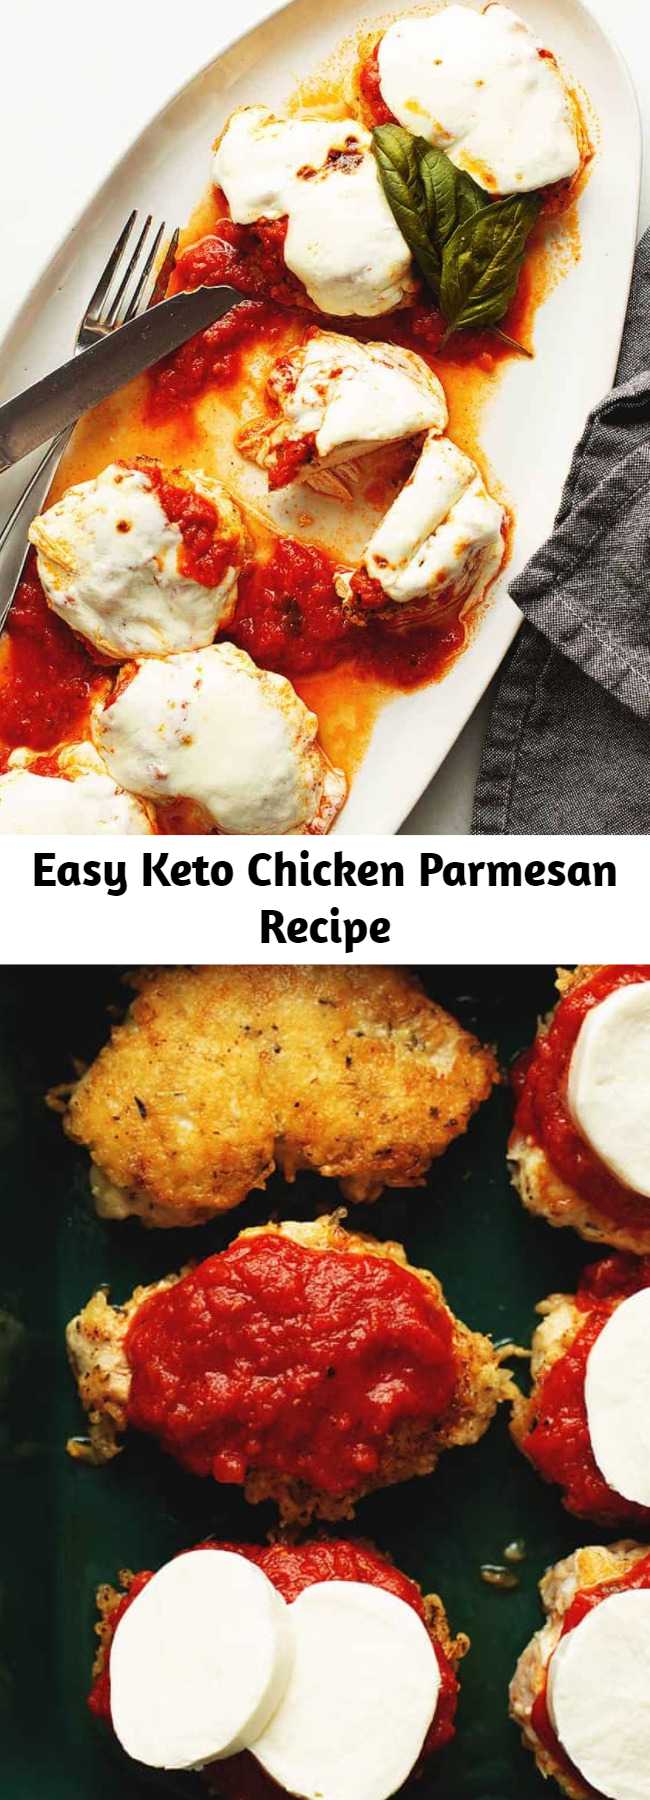 Easy Keto Chicken Parmesan Recipe - Keto chicken parmesan is a quick, easy, and delicious recipe to make for dinner. Thin chicken breasts are crusted in parmesan cheese, pan fried until golden brown, then topped with marinara and melty mozzarella cheese!